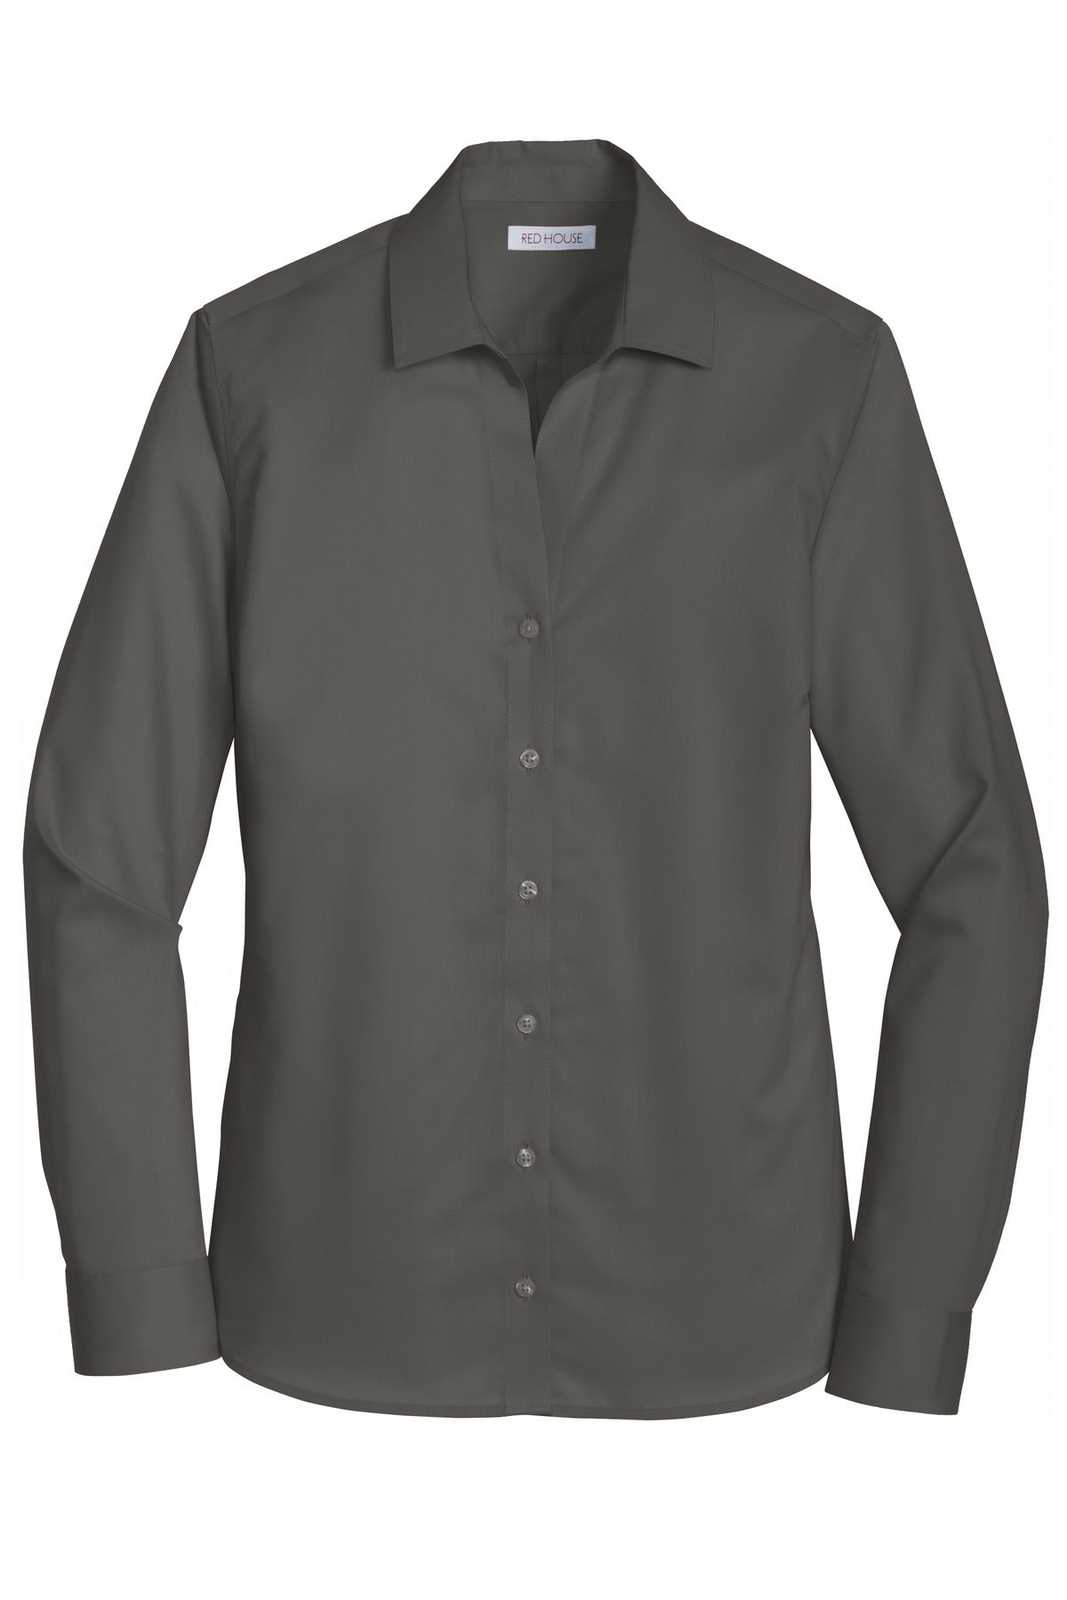 Red House RH79 Ladies Non-Iron Twill Shirt - Gray Steel - HIT a Double - 5